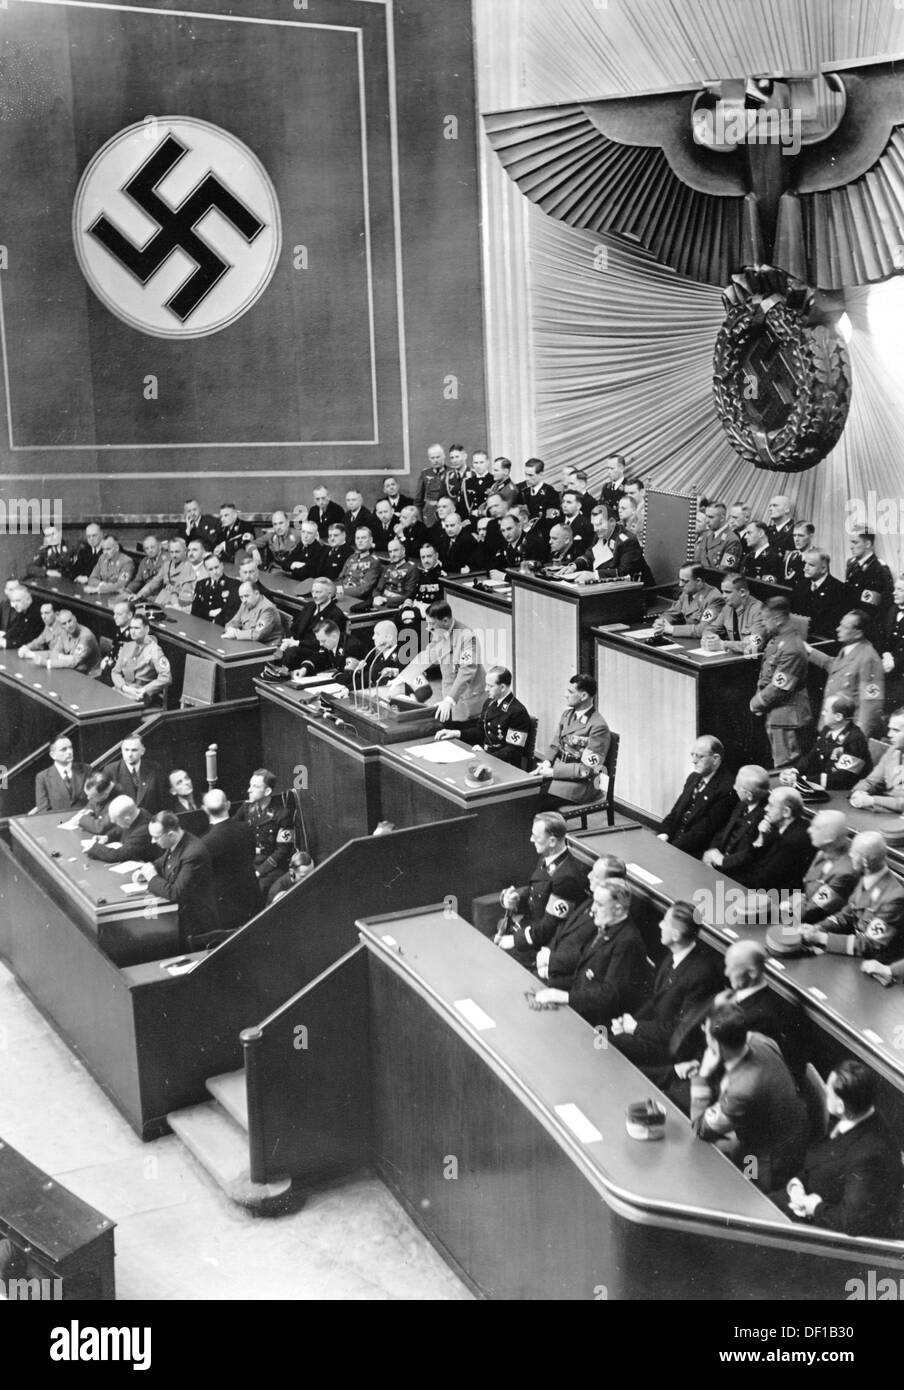 The image from the Nazi Propaganda! shows Reich Chancellor Adolf Hitler delivering a speech to the Reichstags in the Kroll Opera House in Berlin, Germany, 18 March 1938. The speech dealt with, among other topics, the annexation of Austria by the German Reich. To the right, the Austrian government headed by Arthur Seyß-Inquart is pictured, to the left, the German Reich government. Fotoarchiv für Zeitgeschichte Stock Photo